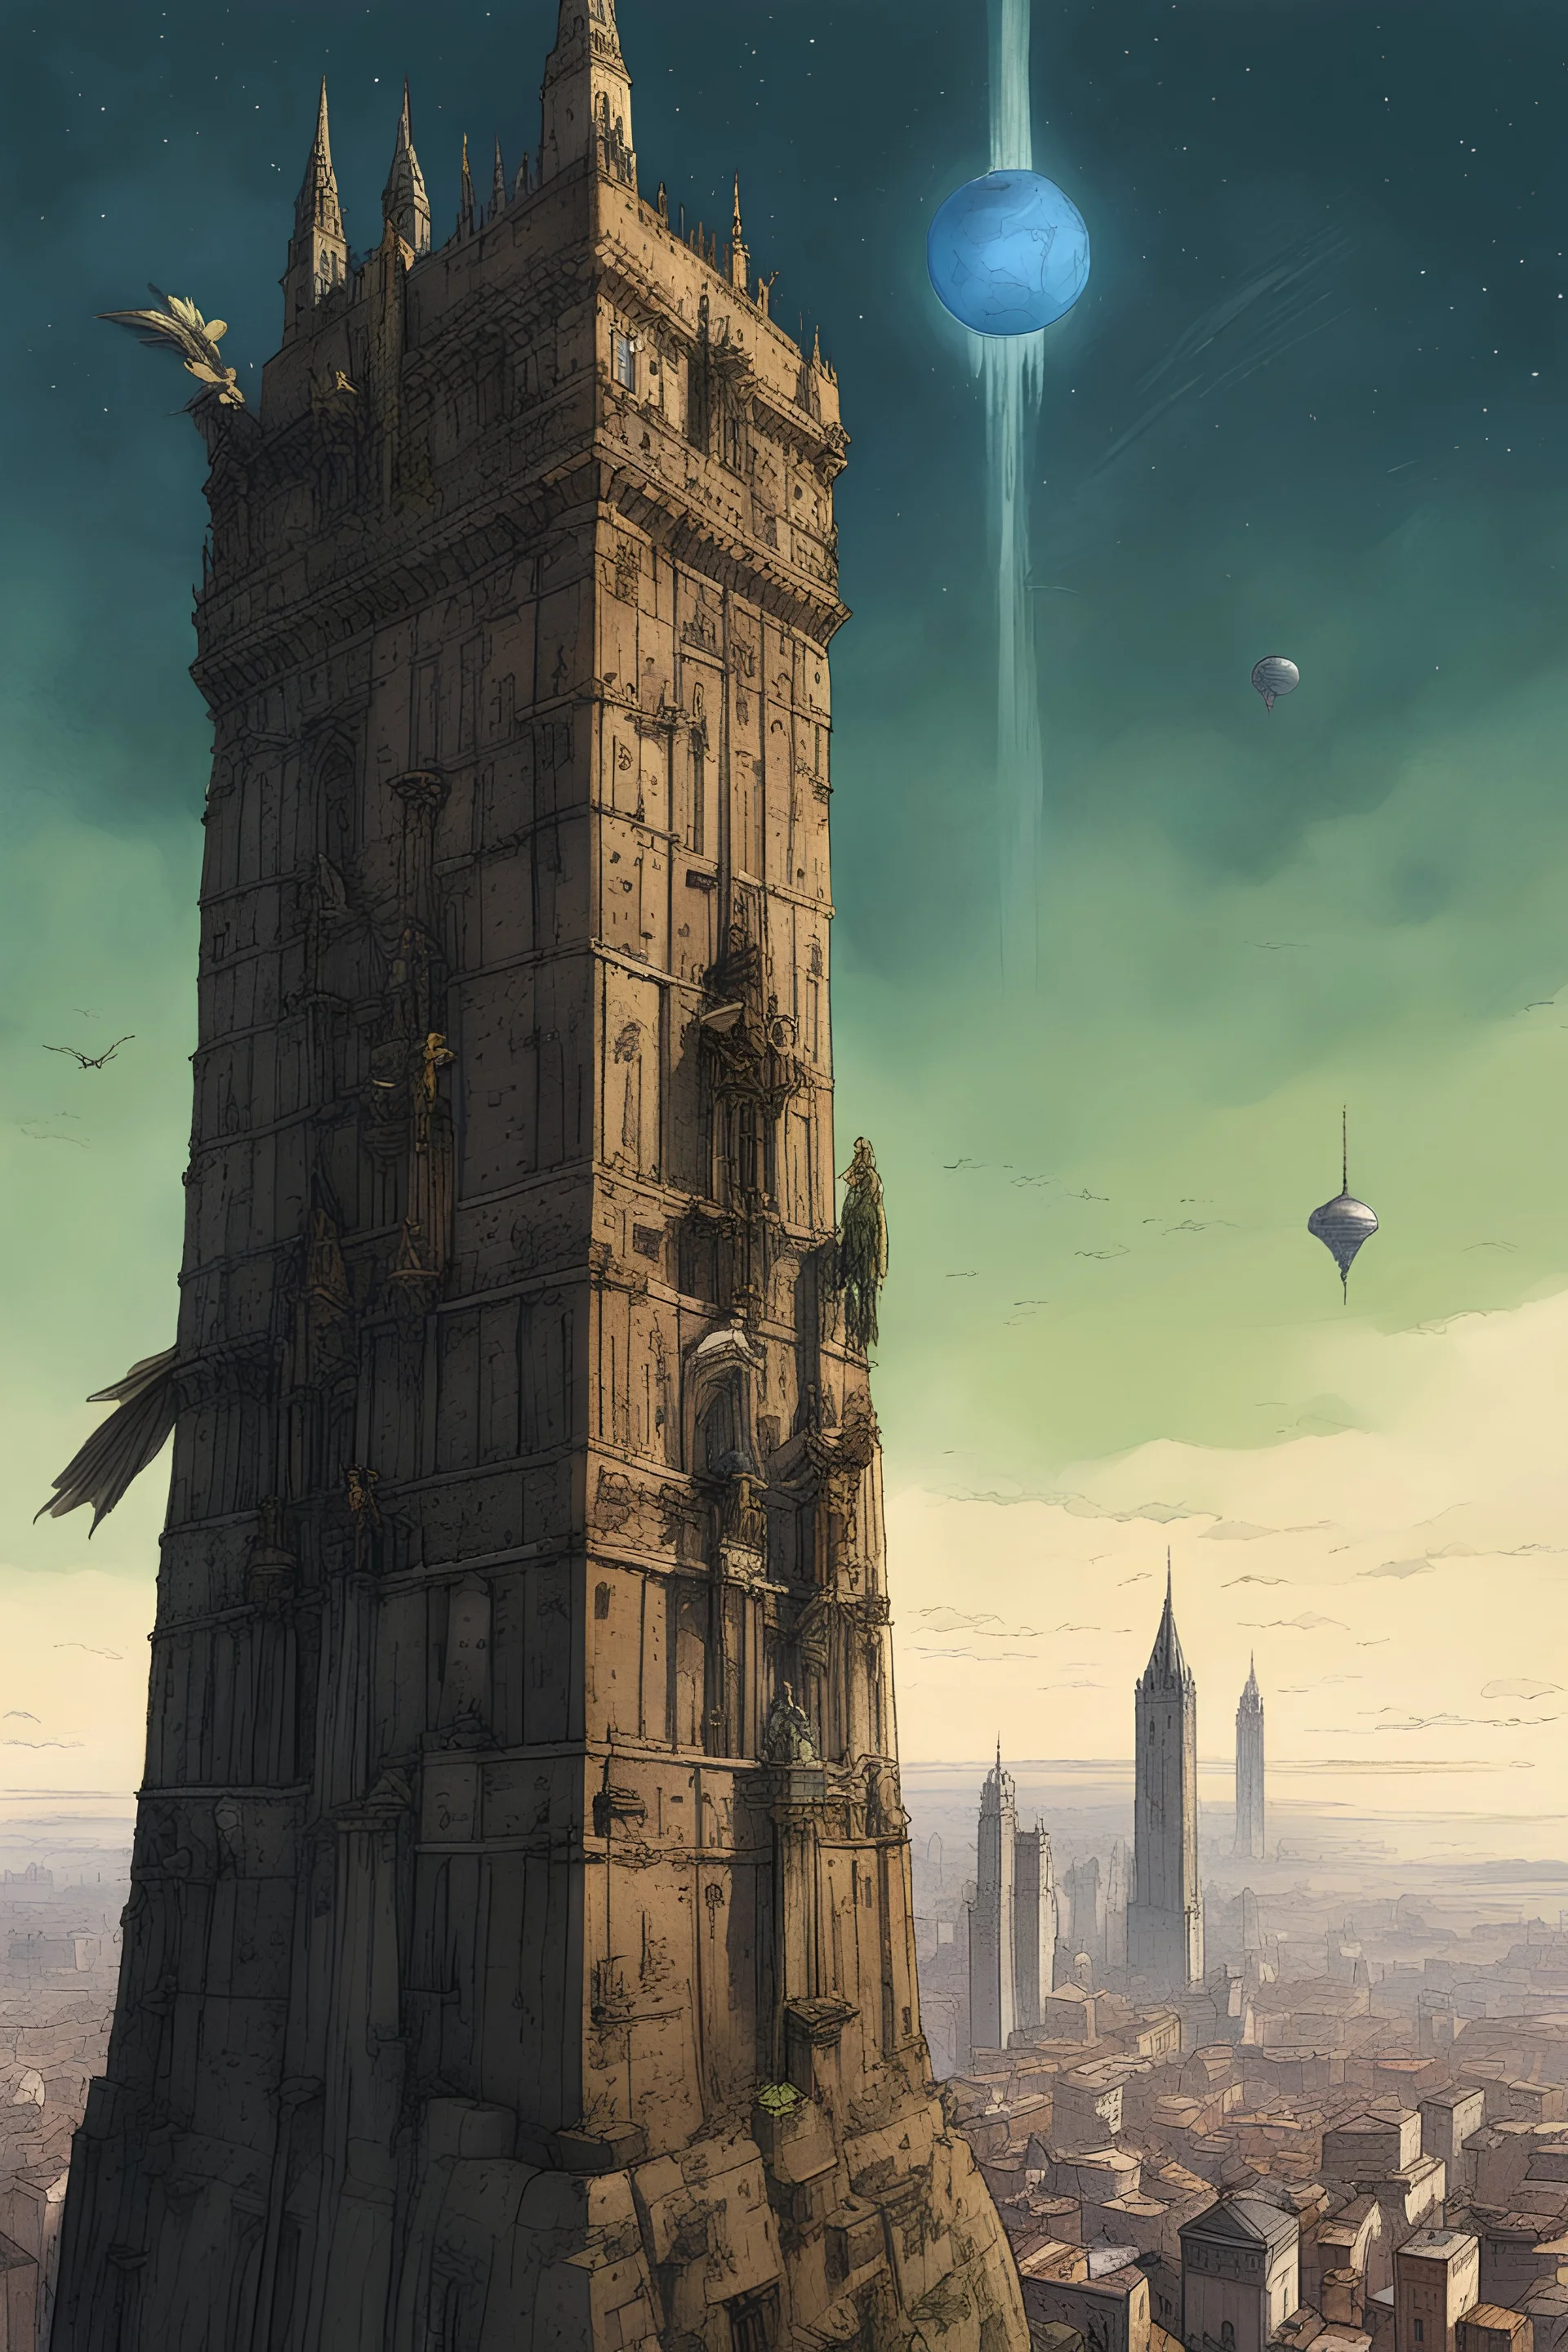 A nighttime, (realistic color) drawing of a female valkyrie looking out from the top of a tall rectangular brown tower at a city like medieval Bologna (many tall, rectangular brown towers dominating the city like skyscrapers). It is nighttime and a terrestrial, green and blue Earth-like planet is in the sky that the valkyrie is looking at. The valkyrie has a valkyrie-style helmet on and she looks like a silhouette. The valkyrie is looking directly at the planet in the sky.